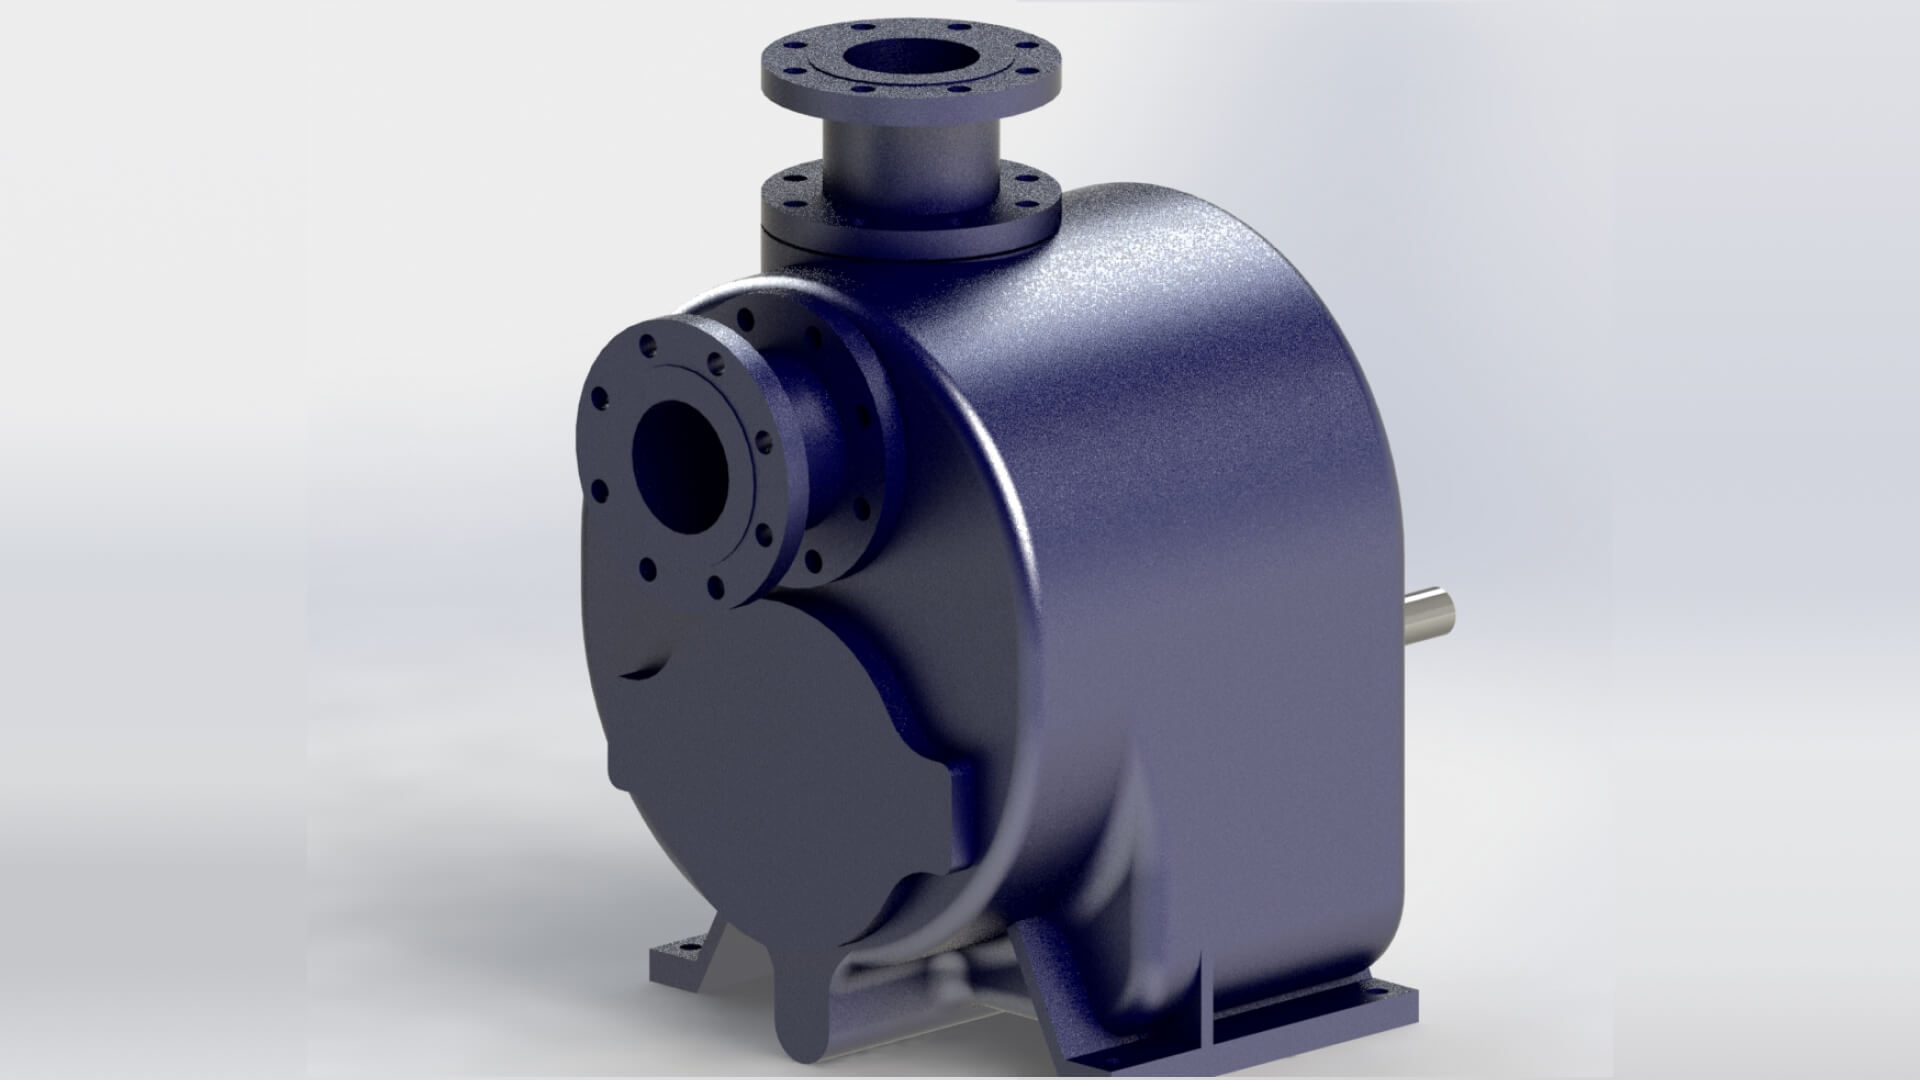 A 3D CAD drawing of the interior of an industrial self-priming pump.